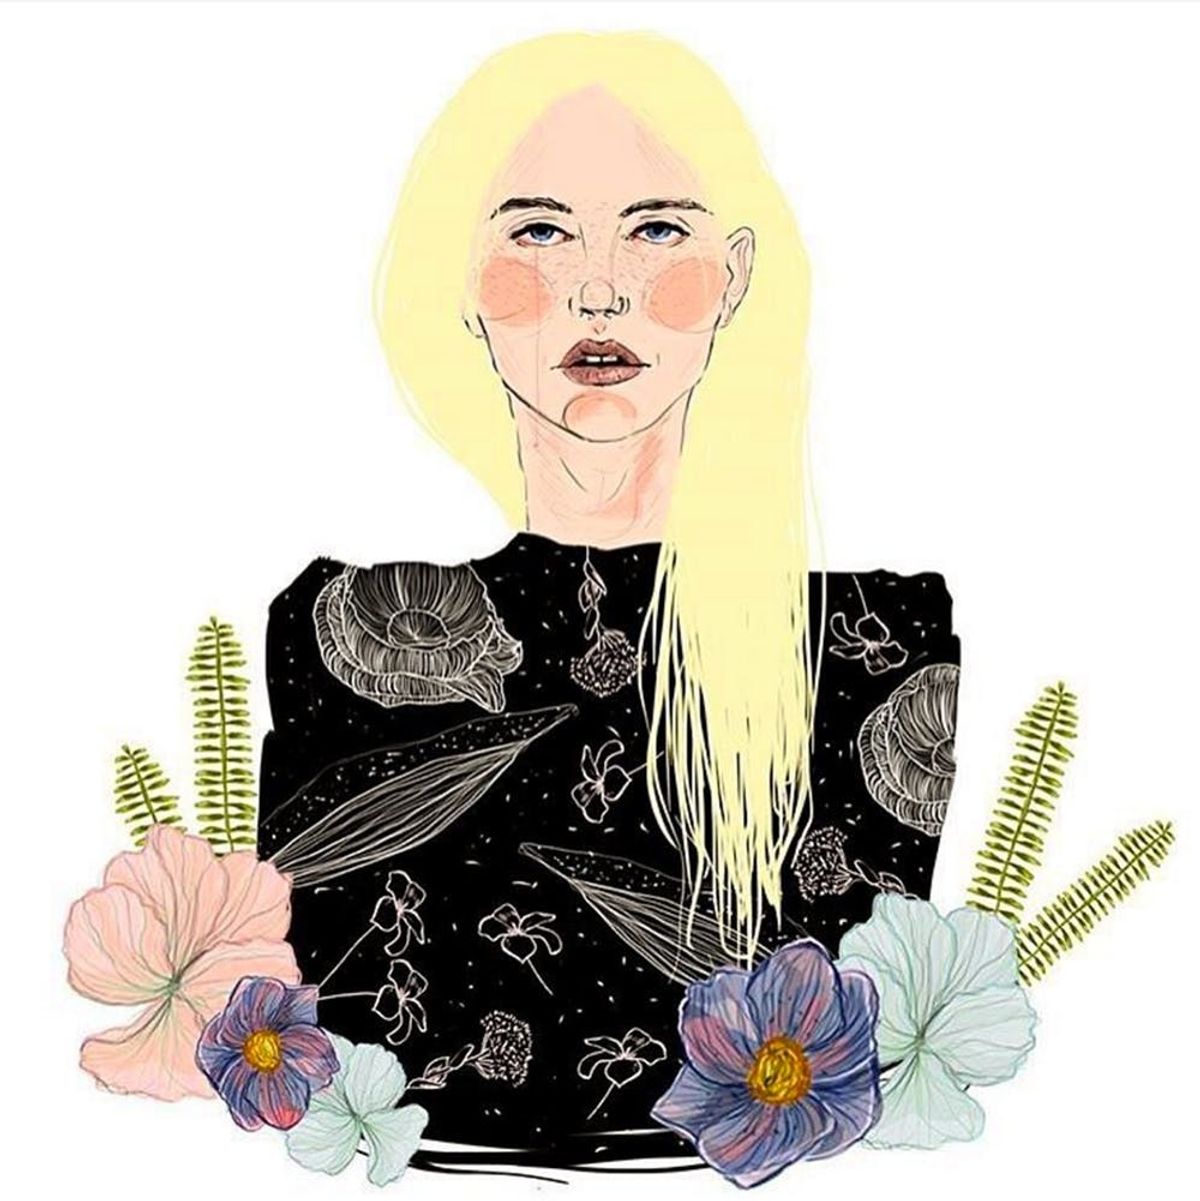 The Story Behind That Kesha Illustration All the Celebs Are Sharing